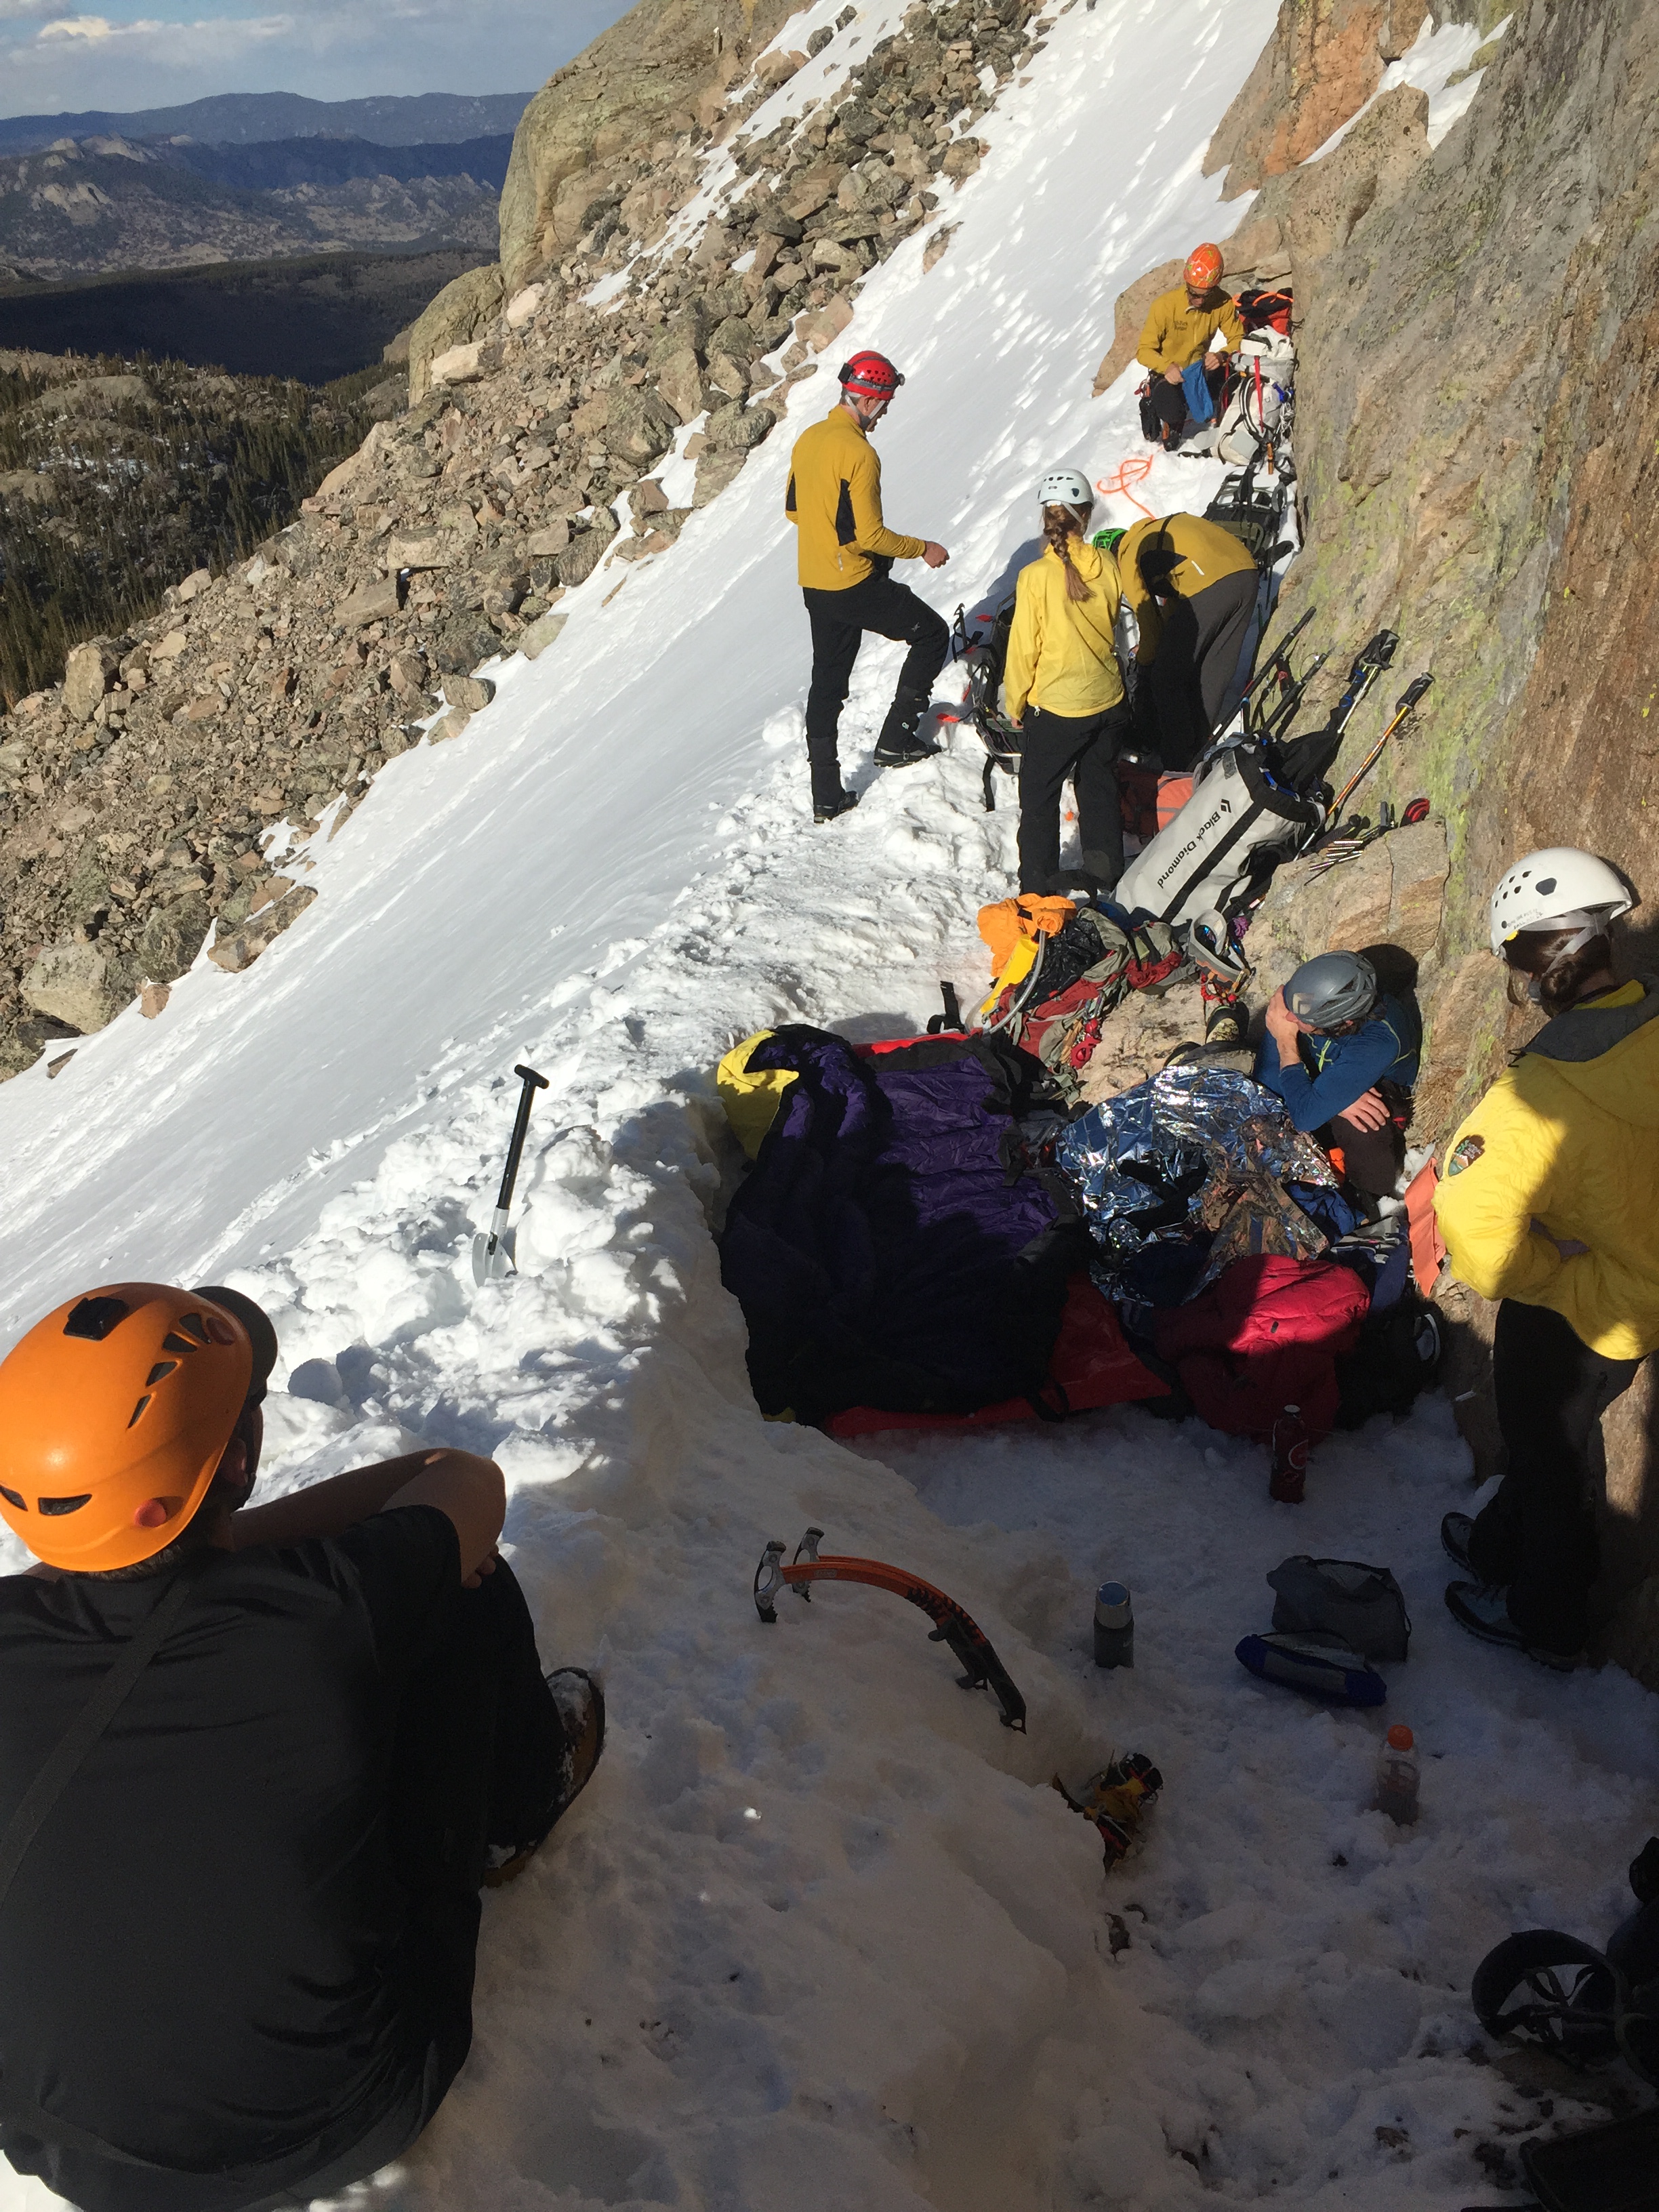 Rescue Incident On Thatchtop Above The Loch in RMNP March 31 - Courtesy Rocky Mountain National Park